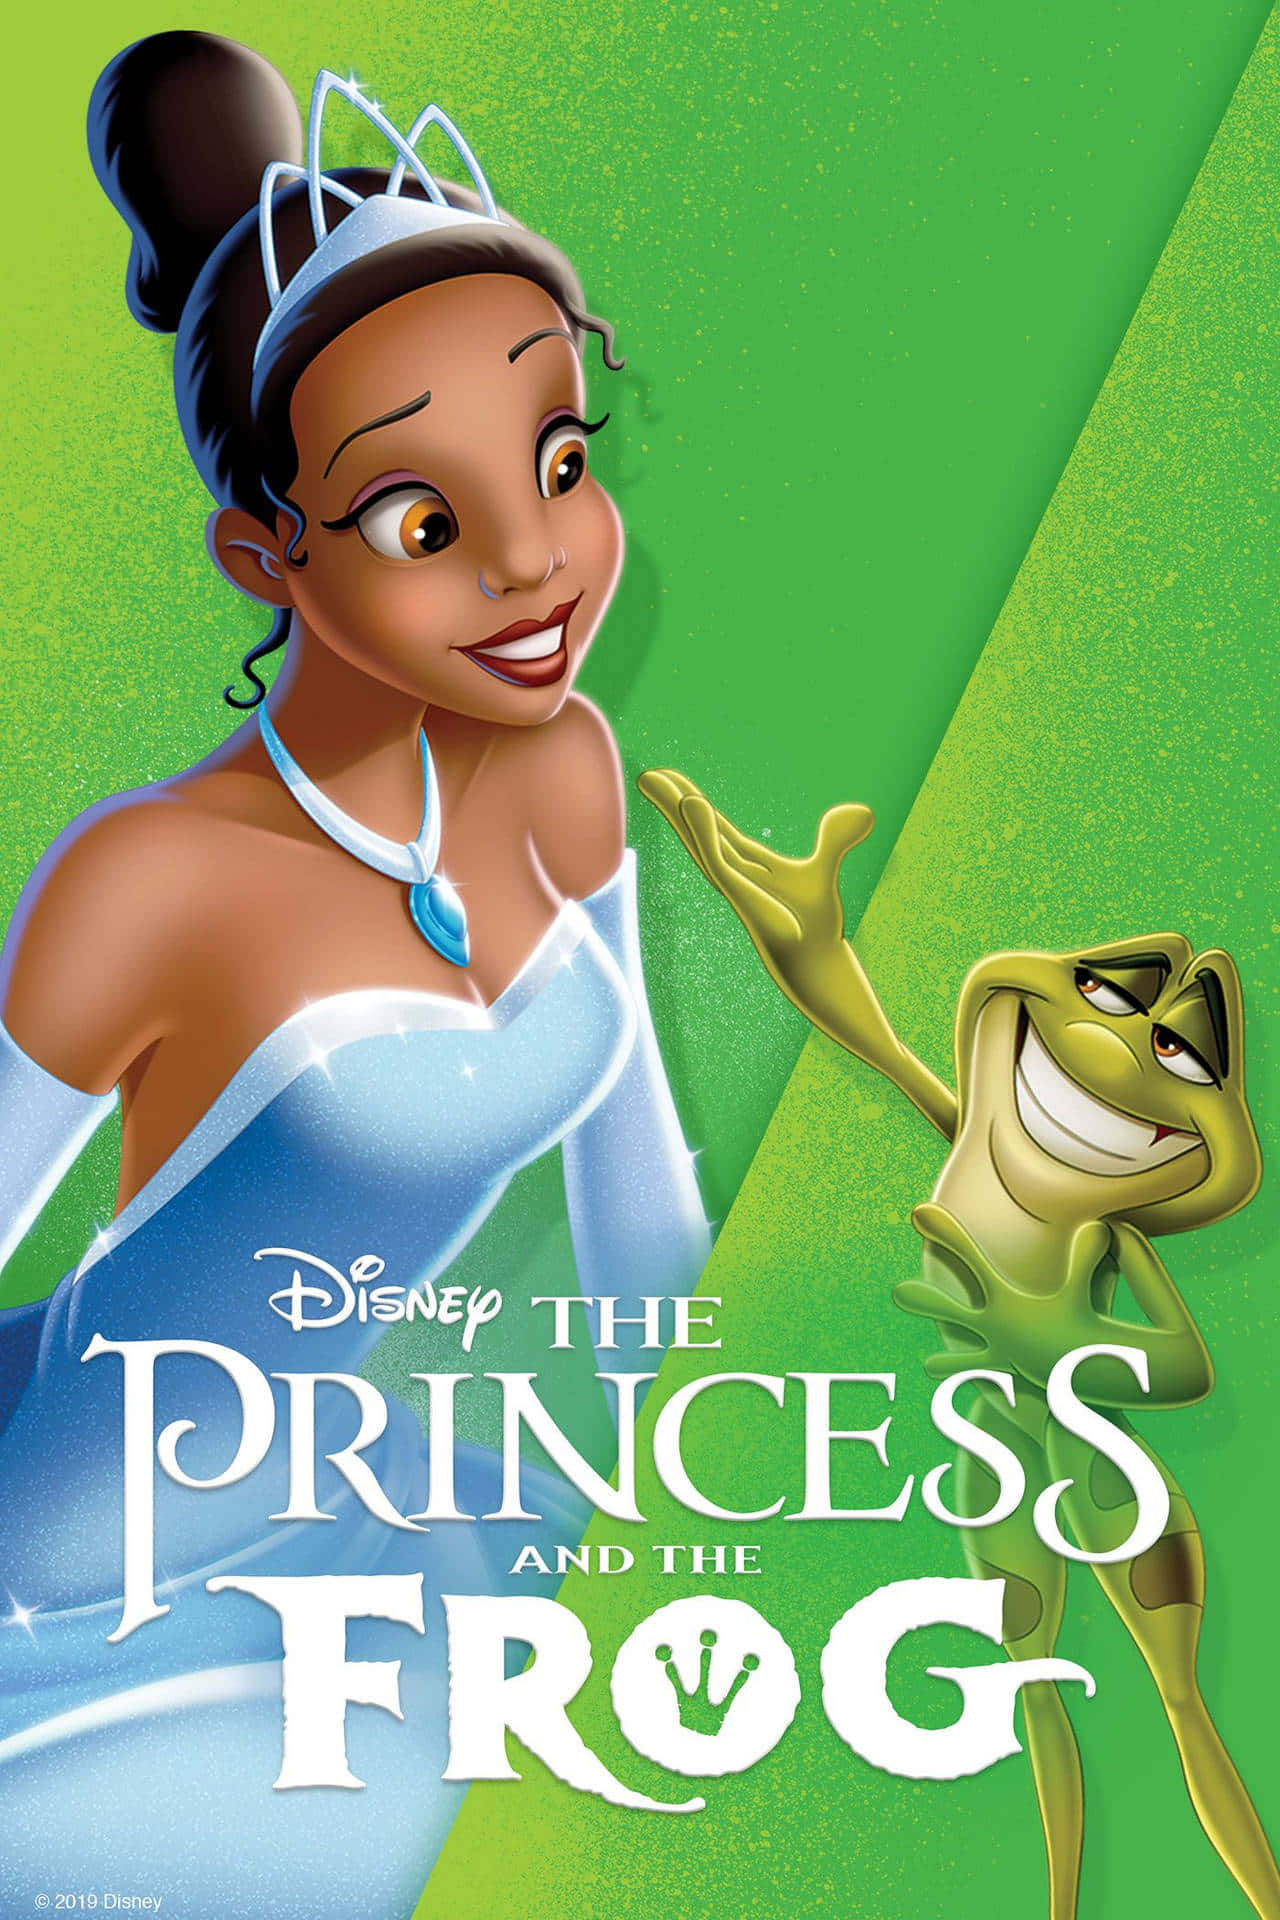 Princess Tiana and Prince Naveen in a musical scene